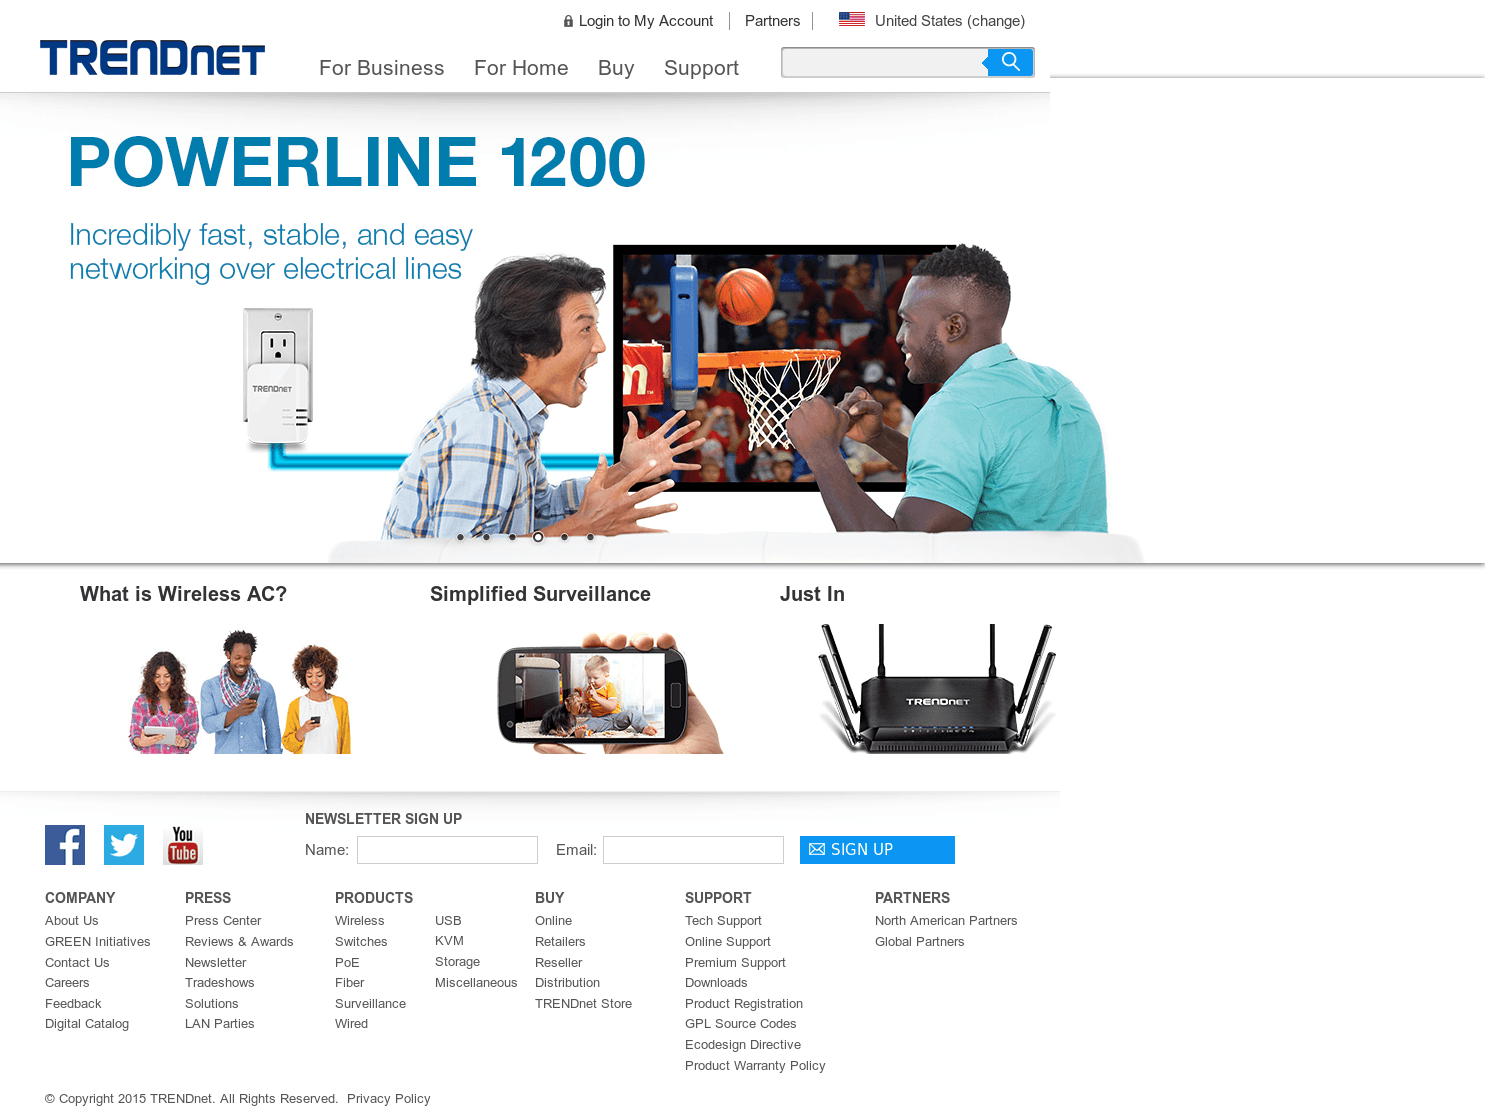 TRENDnet Logo - TRENDnet Competitors, Revenue and Employees - Owler Company Profile